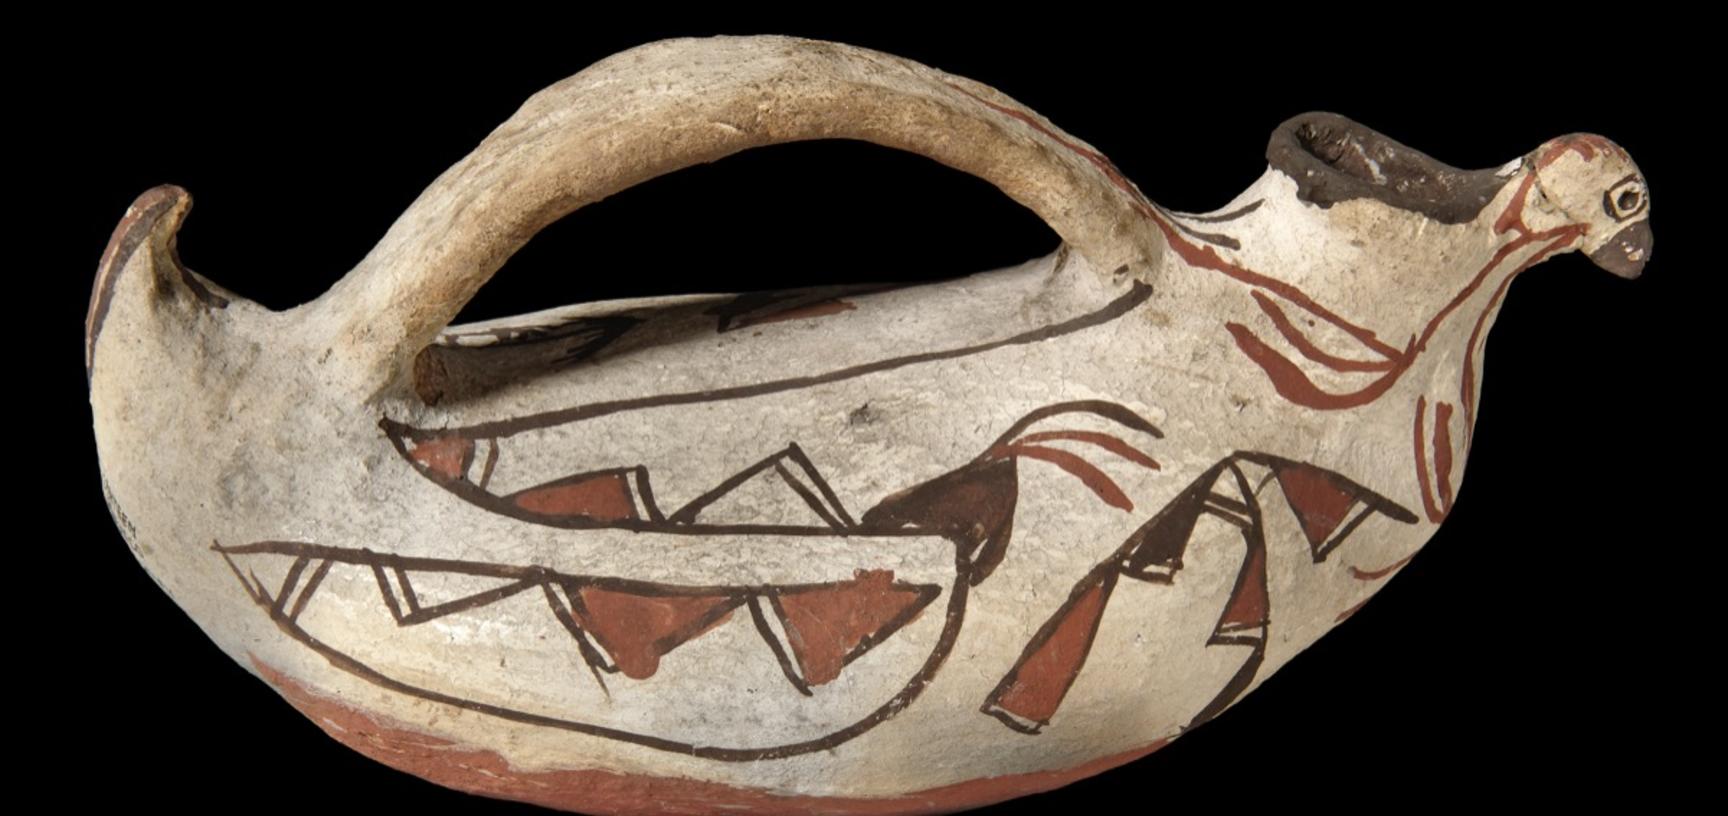 Pottery canteen, or water vessel, in the form of a duck, collected in Zuni Pueblo by James Stevenson for the United States Geological Survey. 